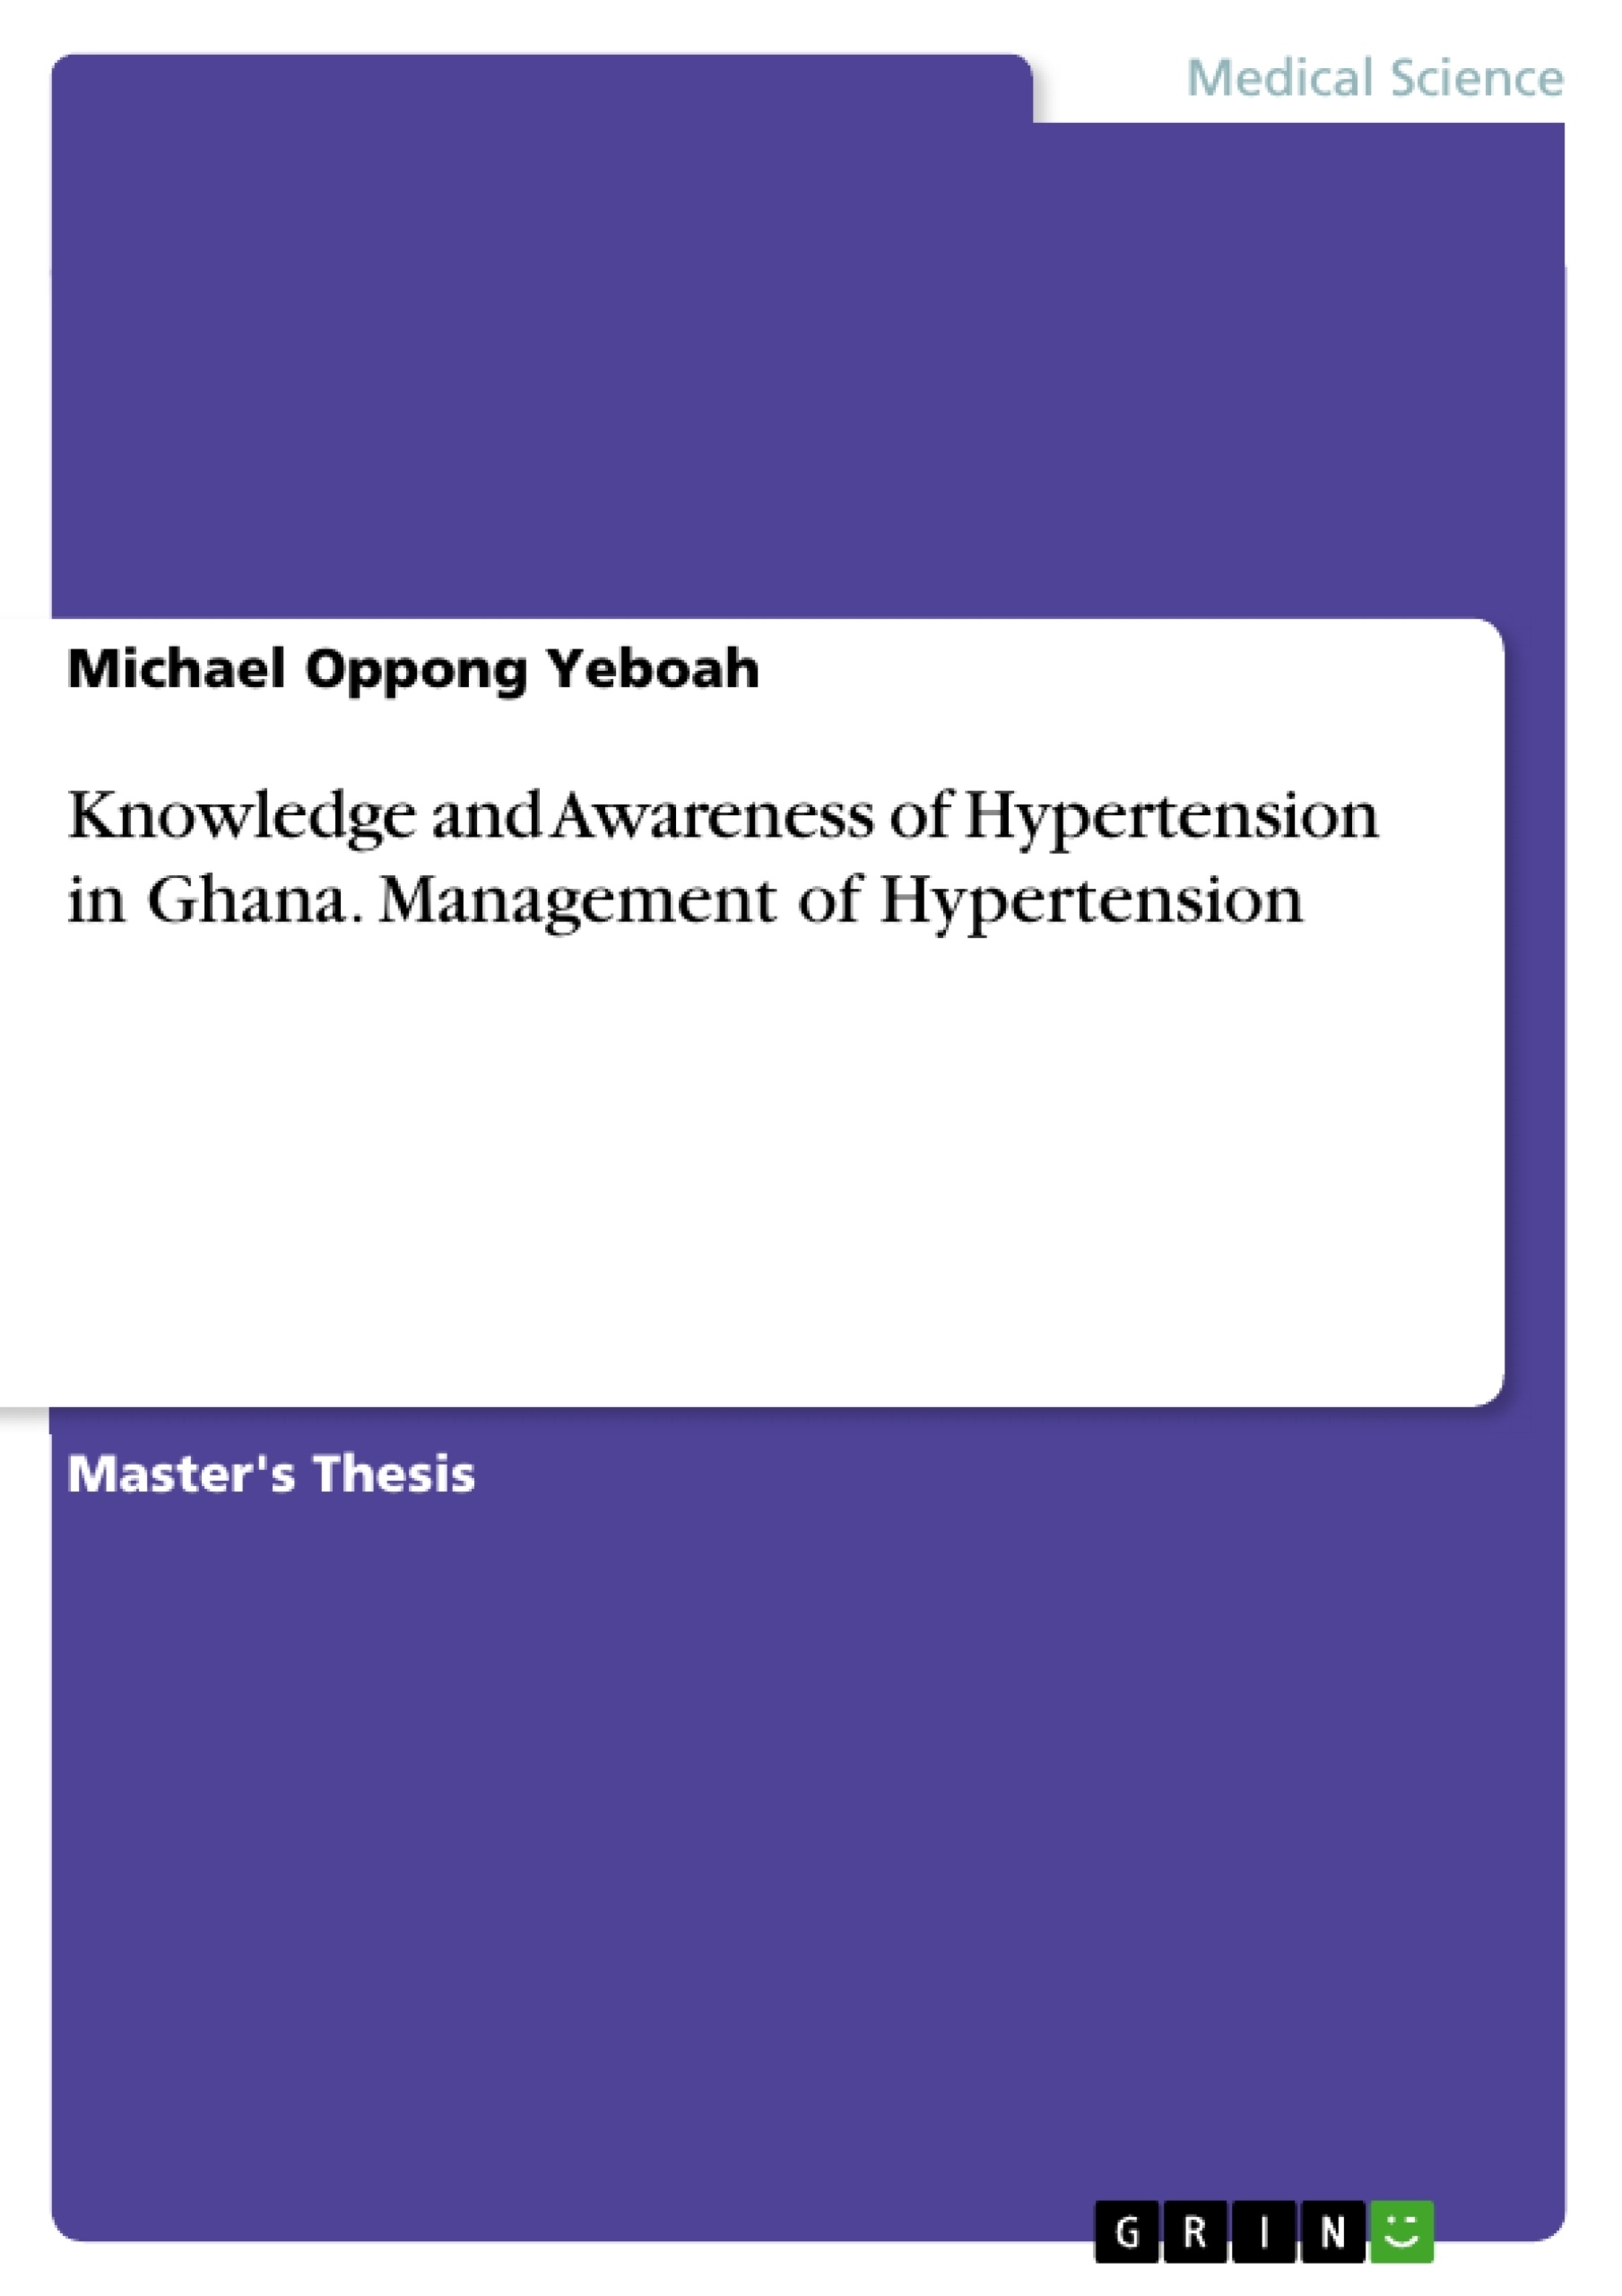 Title: Knowledge and Awareness of Hypertension in Ghana. Management of Hypertension